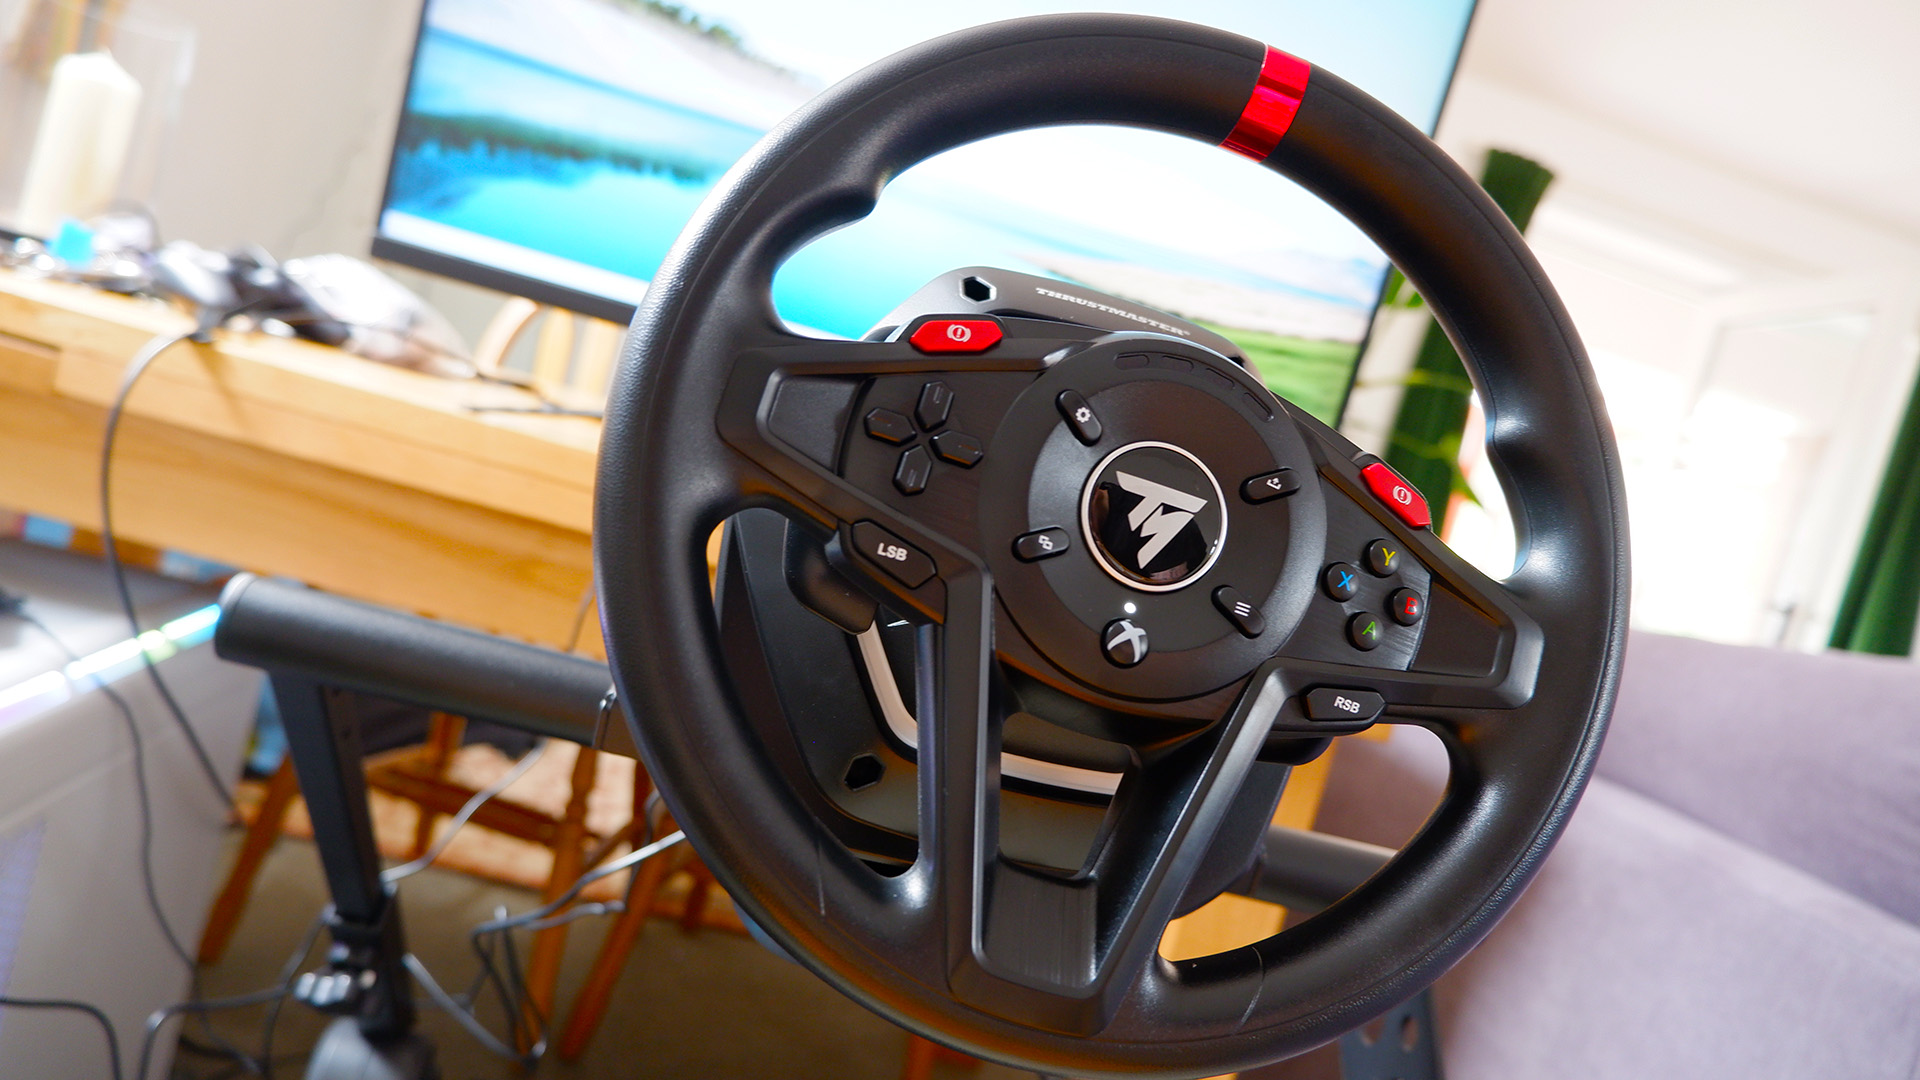 The Thrustmaster T128 racing wheel mounted on a Monoprice stand.